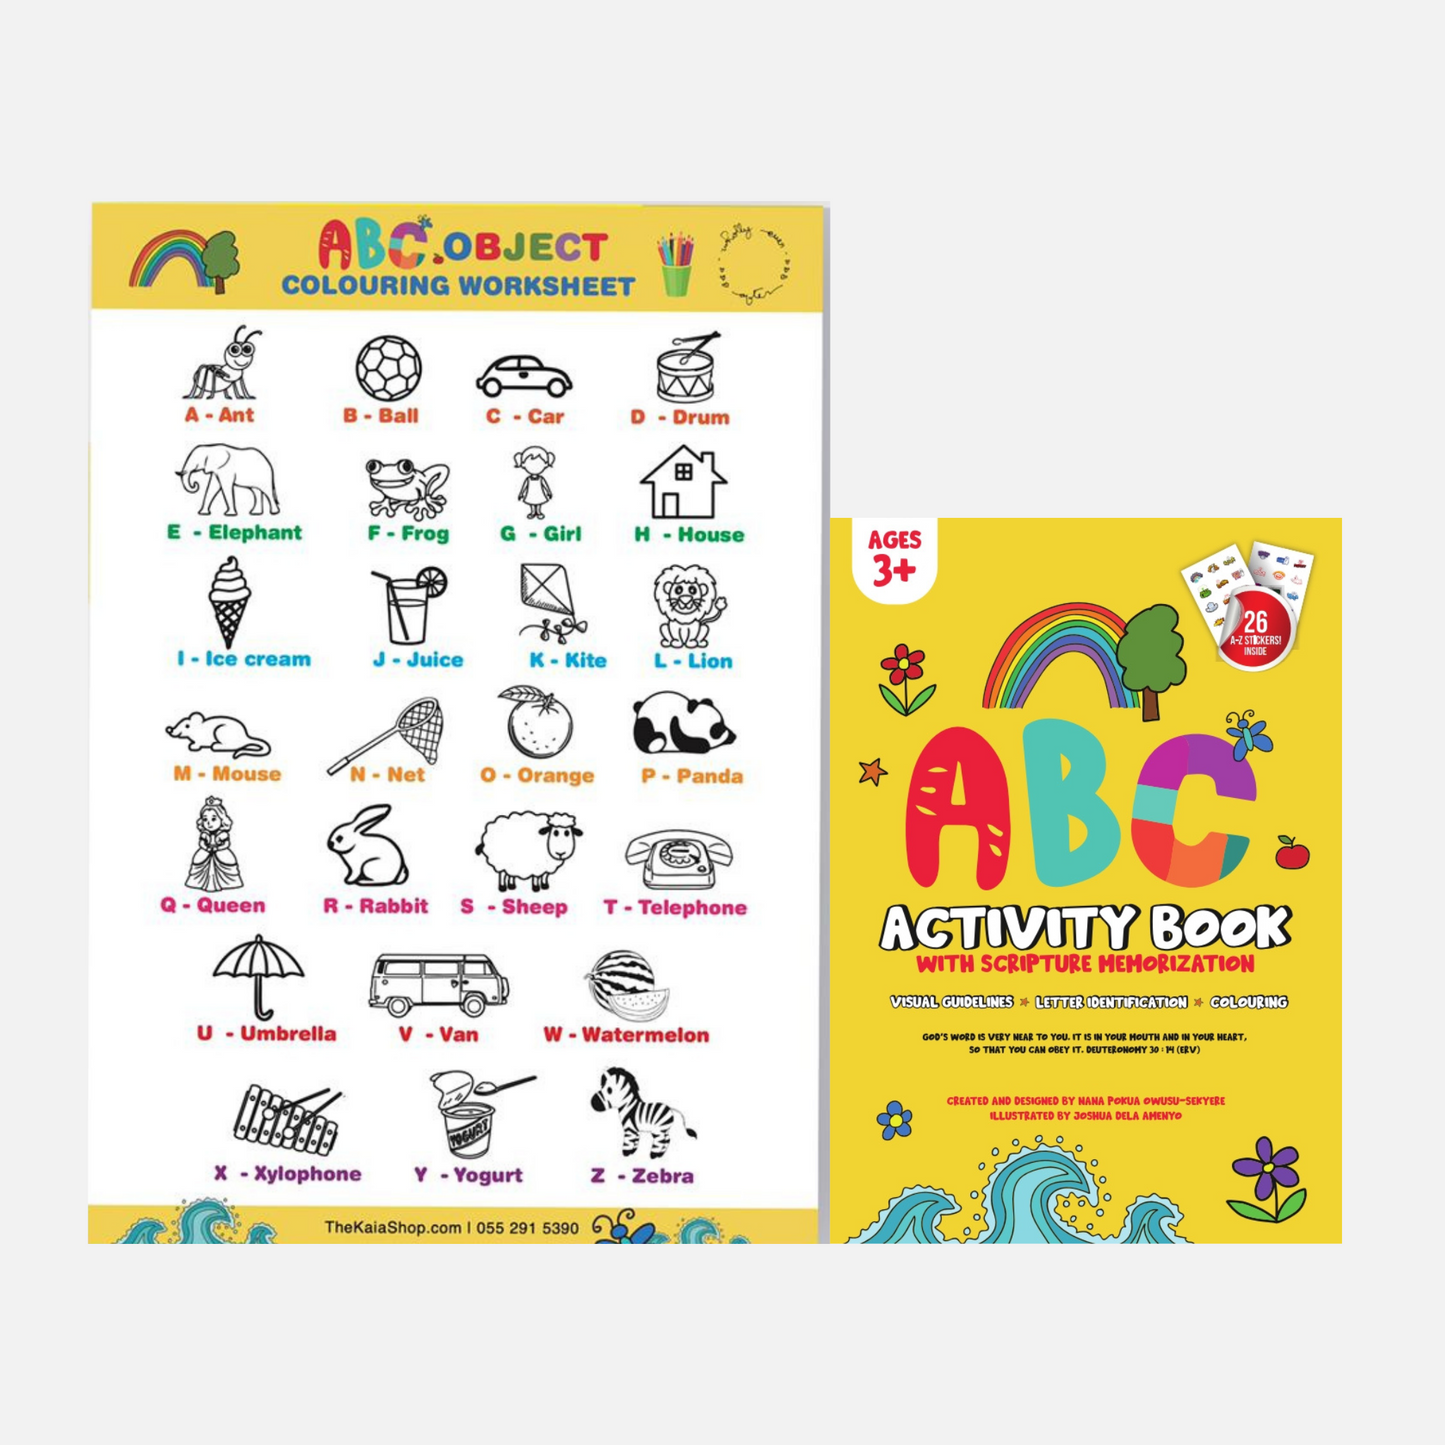 ABC activity book with scripture memorization & ABC object colouring chart